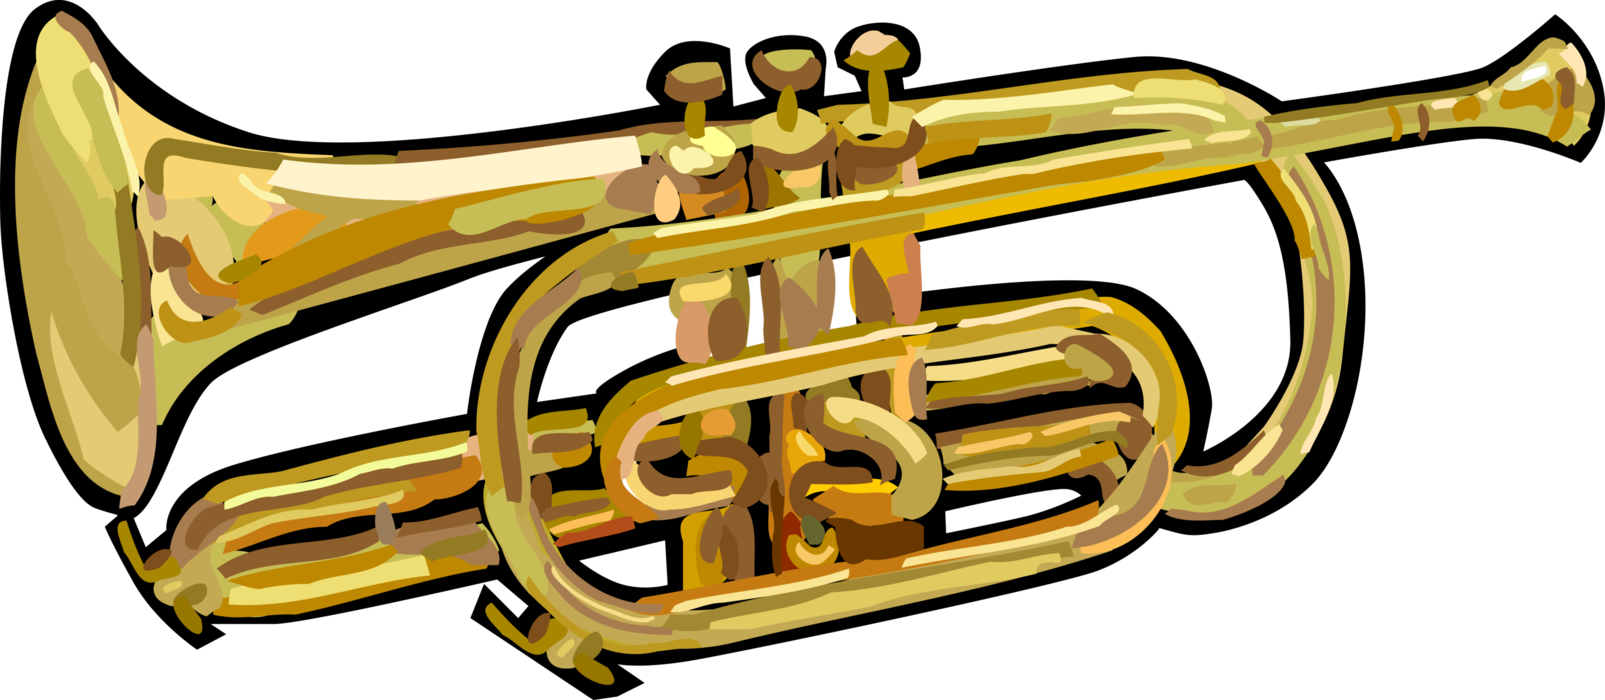 Brass Band Trumpet Background PNG Image